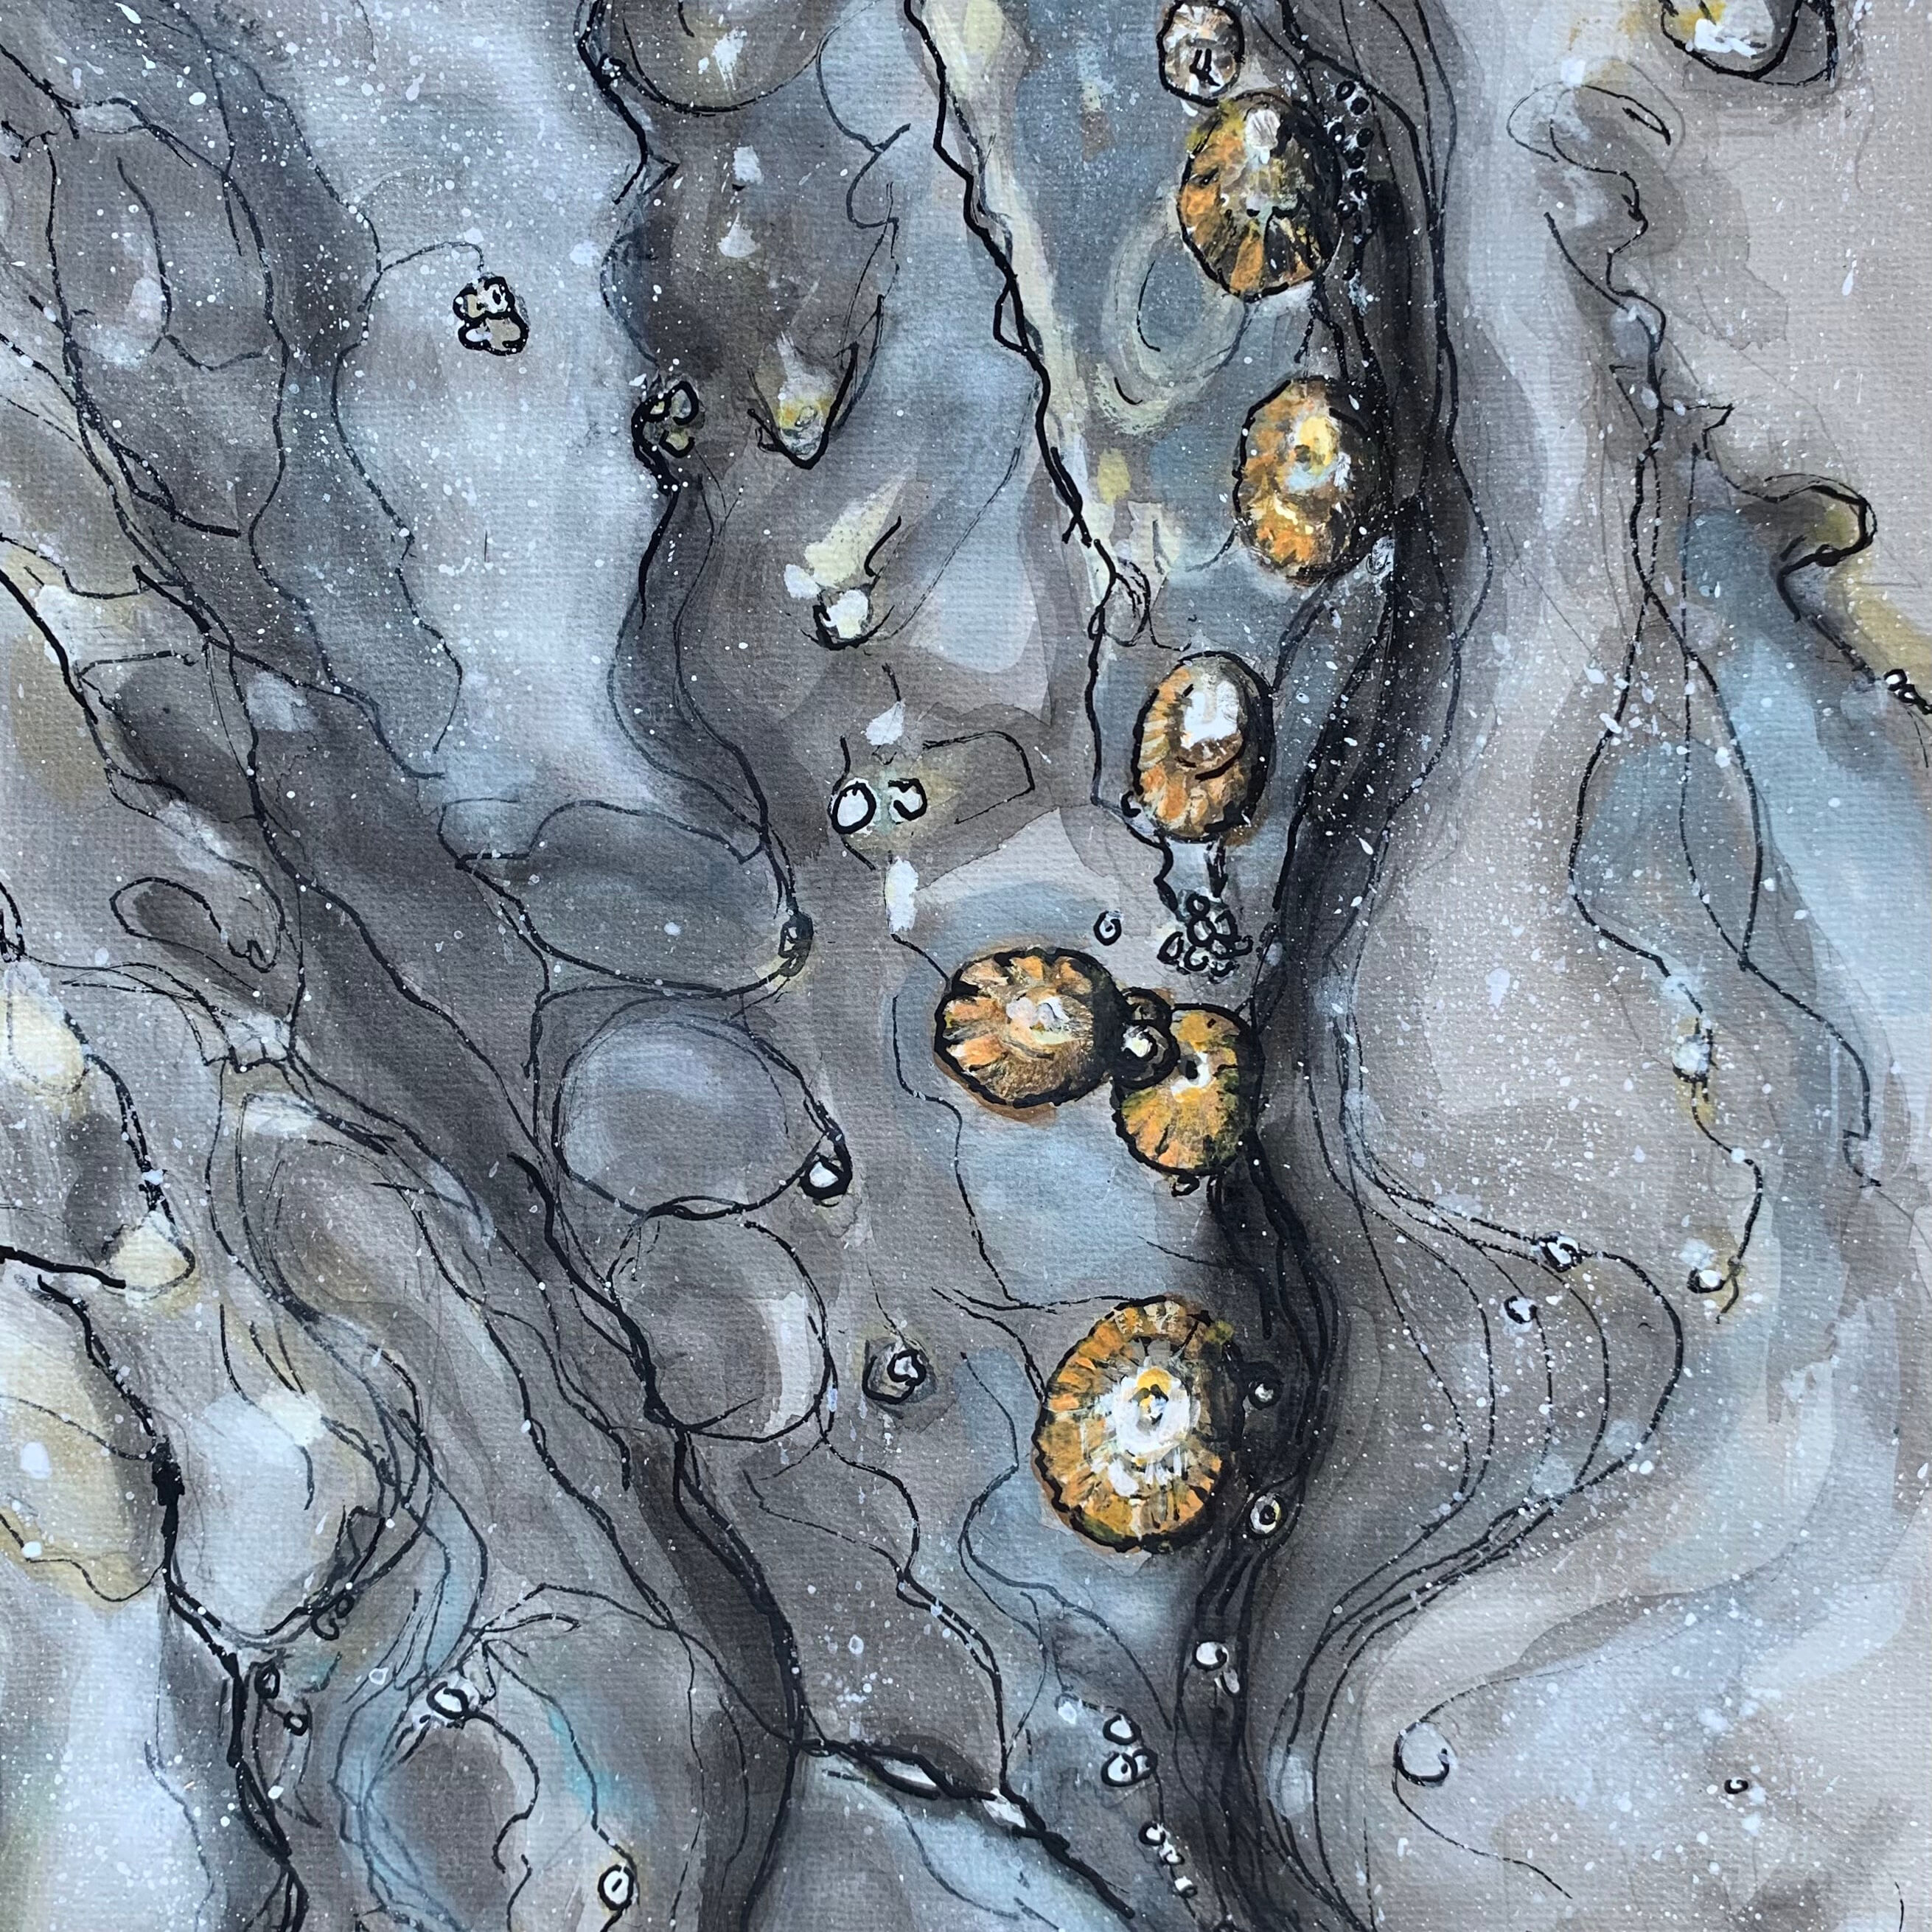 29_Hans Van Weerd_Limpets and Barnacles waiting for the Tide_Ink, watercolour and gouache